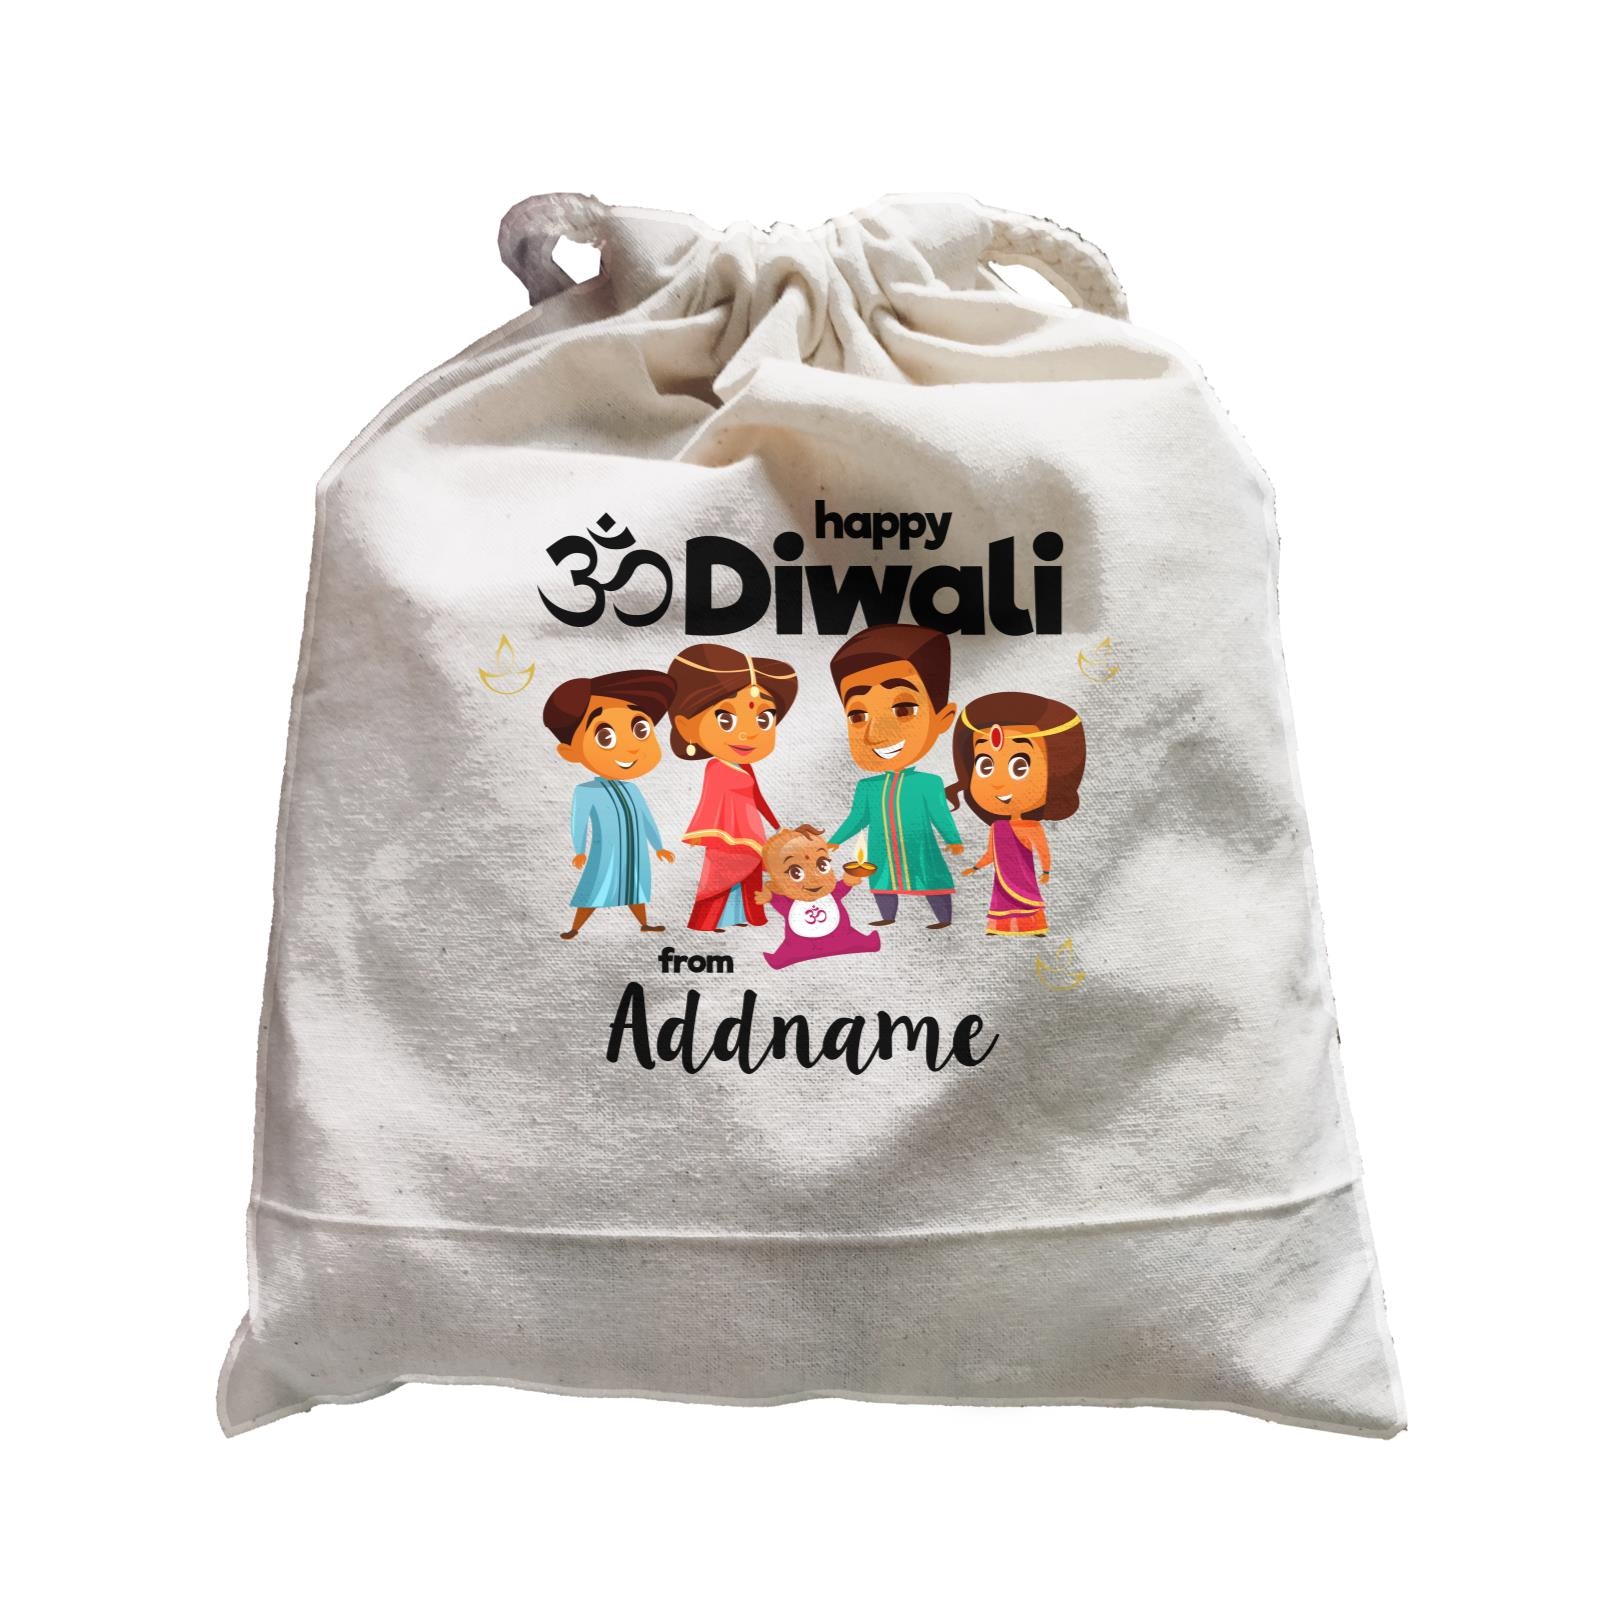 Cute Family Of Five OM Happy Diwali From Addname Satchel